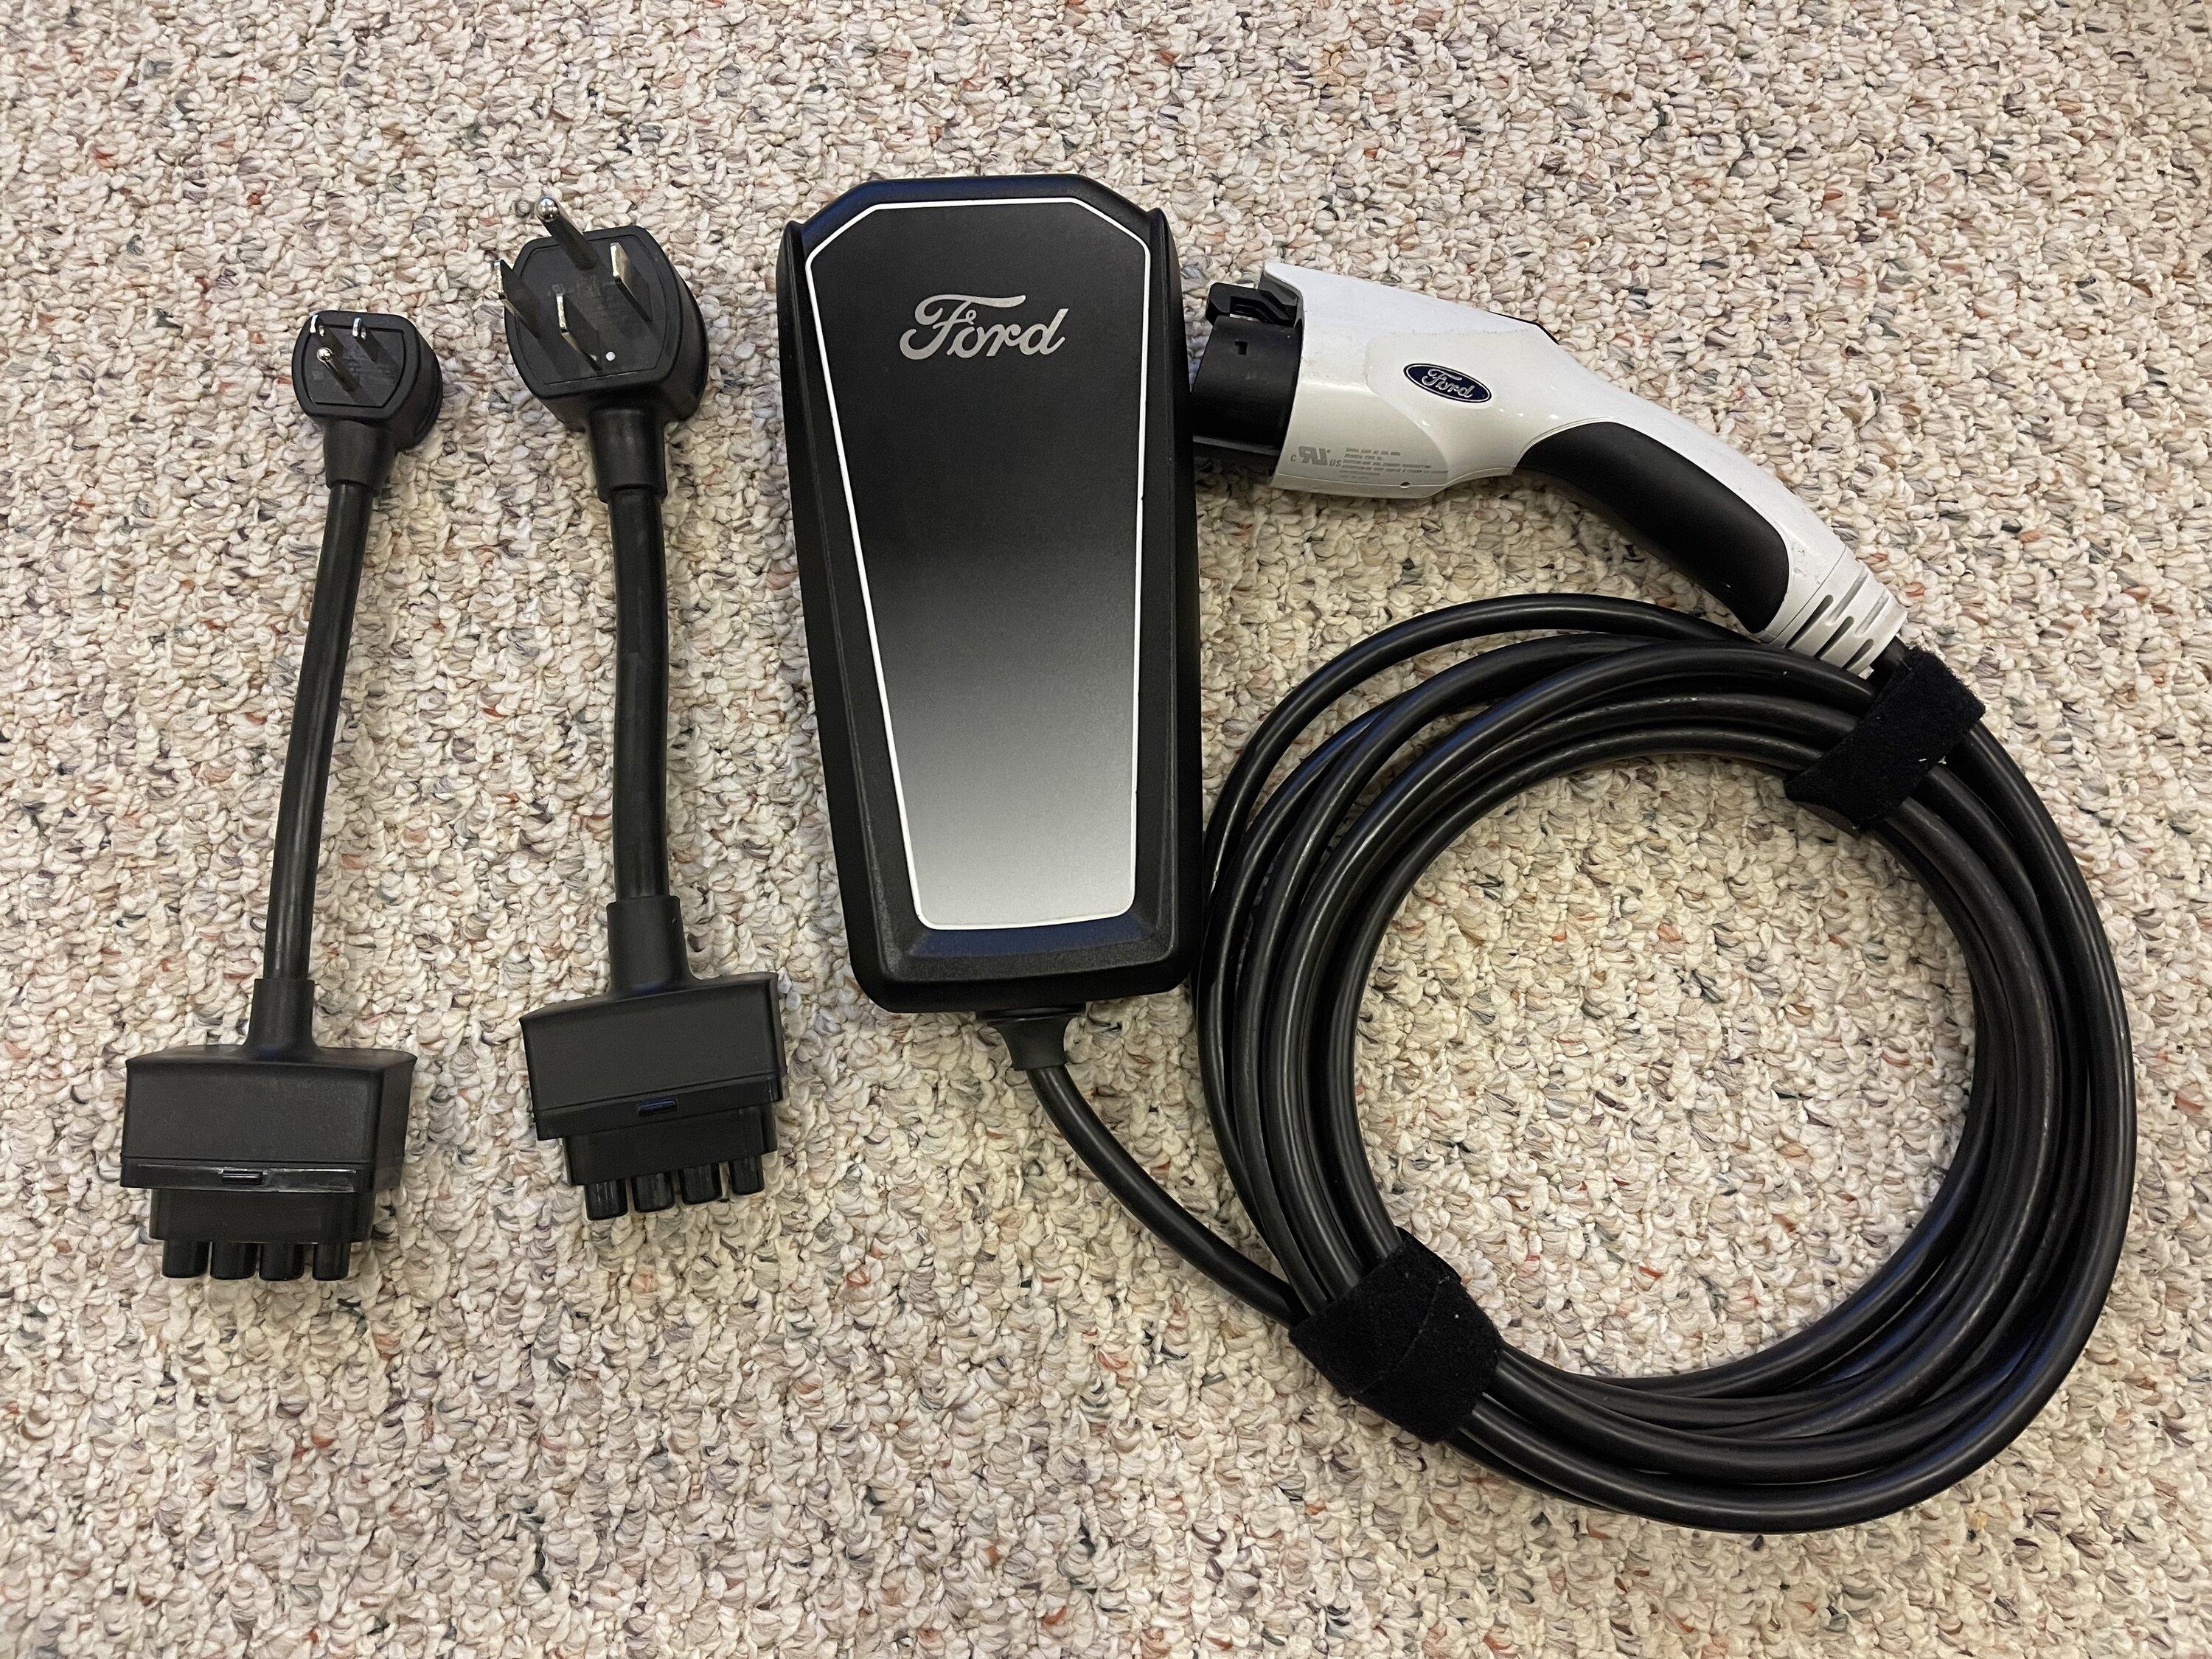 Ford F-150 Lightning [FS] [VA] Ford mobile charger/EVSE $325 shipped 1